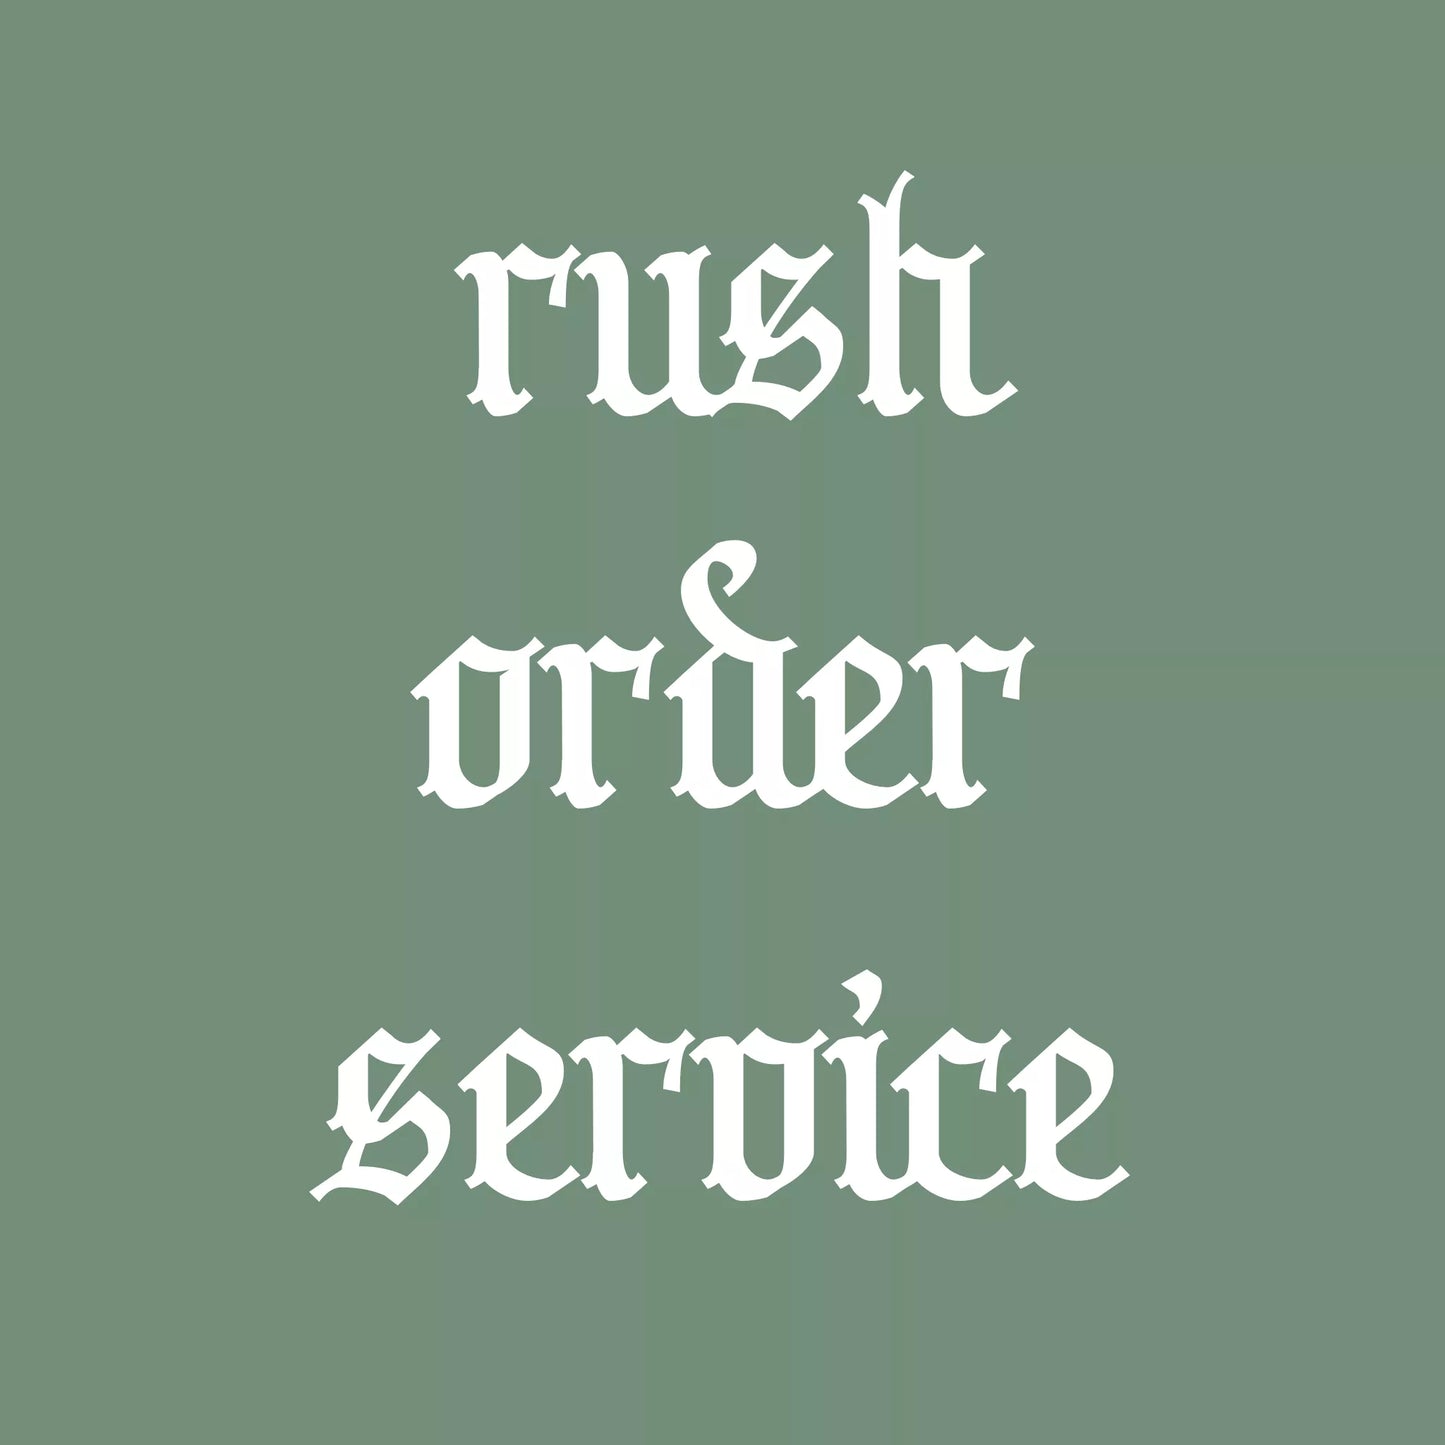 Rush Order Service, The Serpents Club